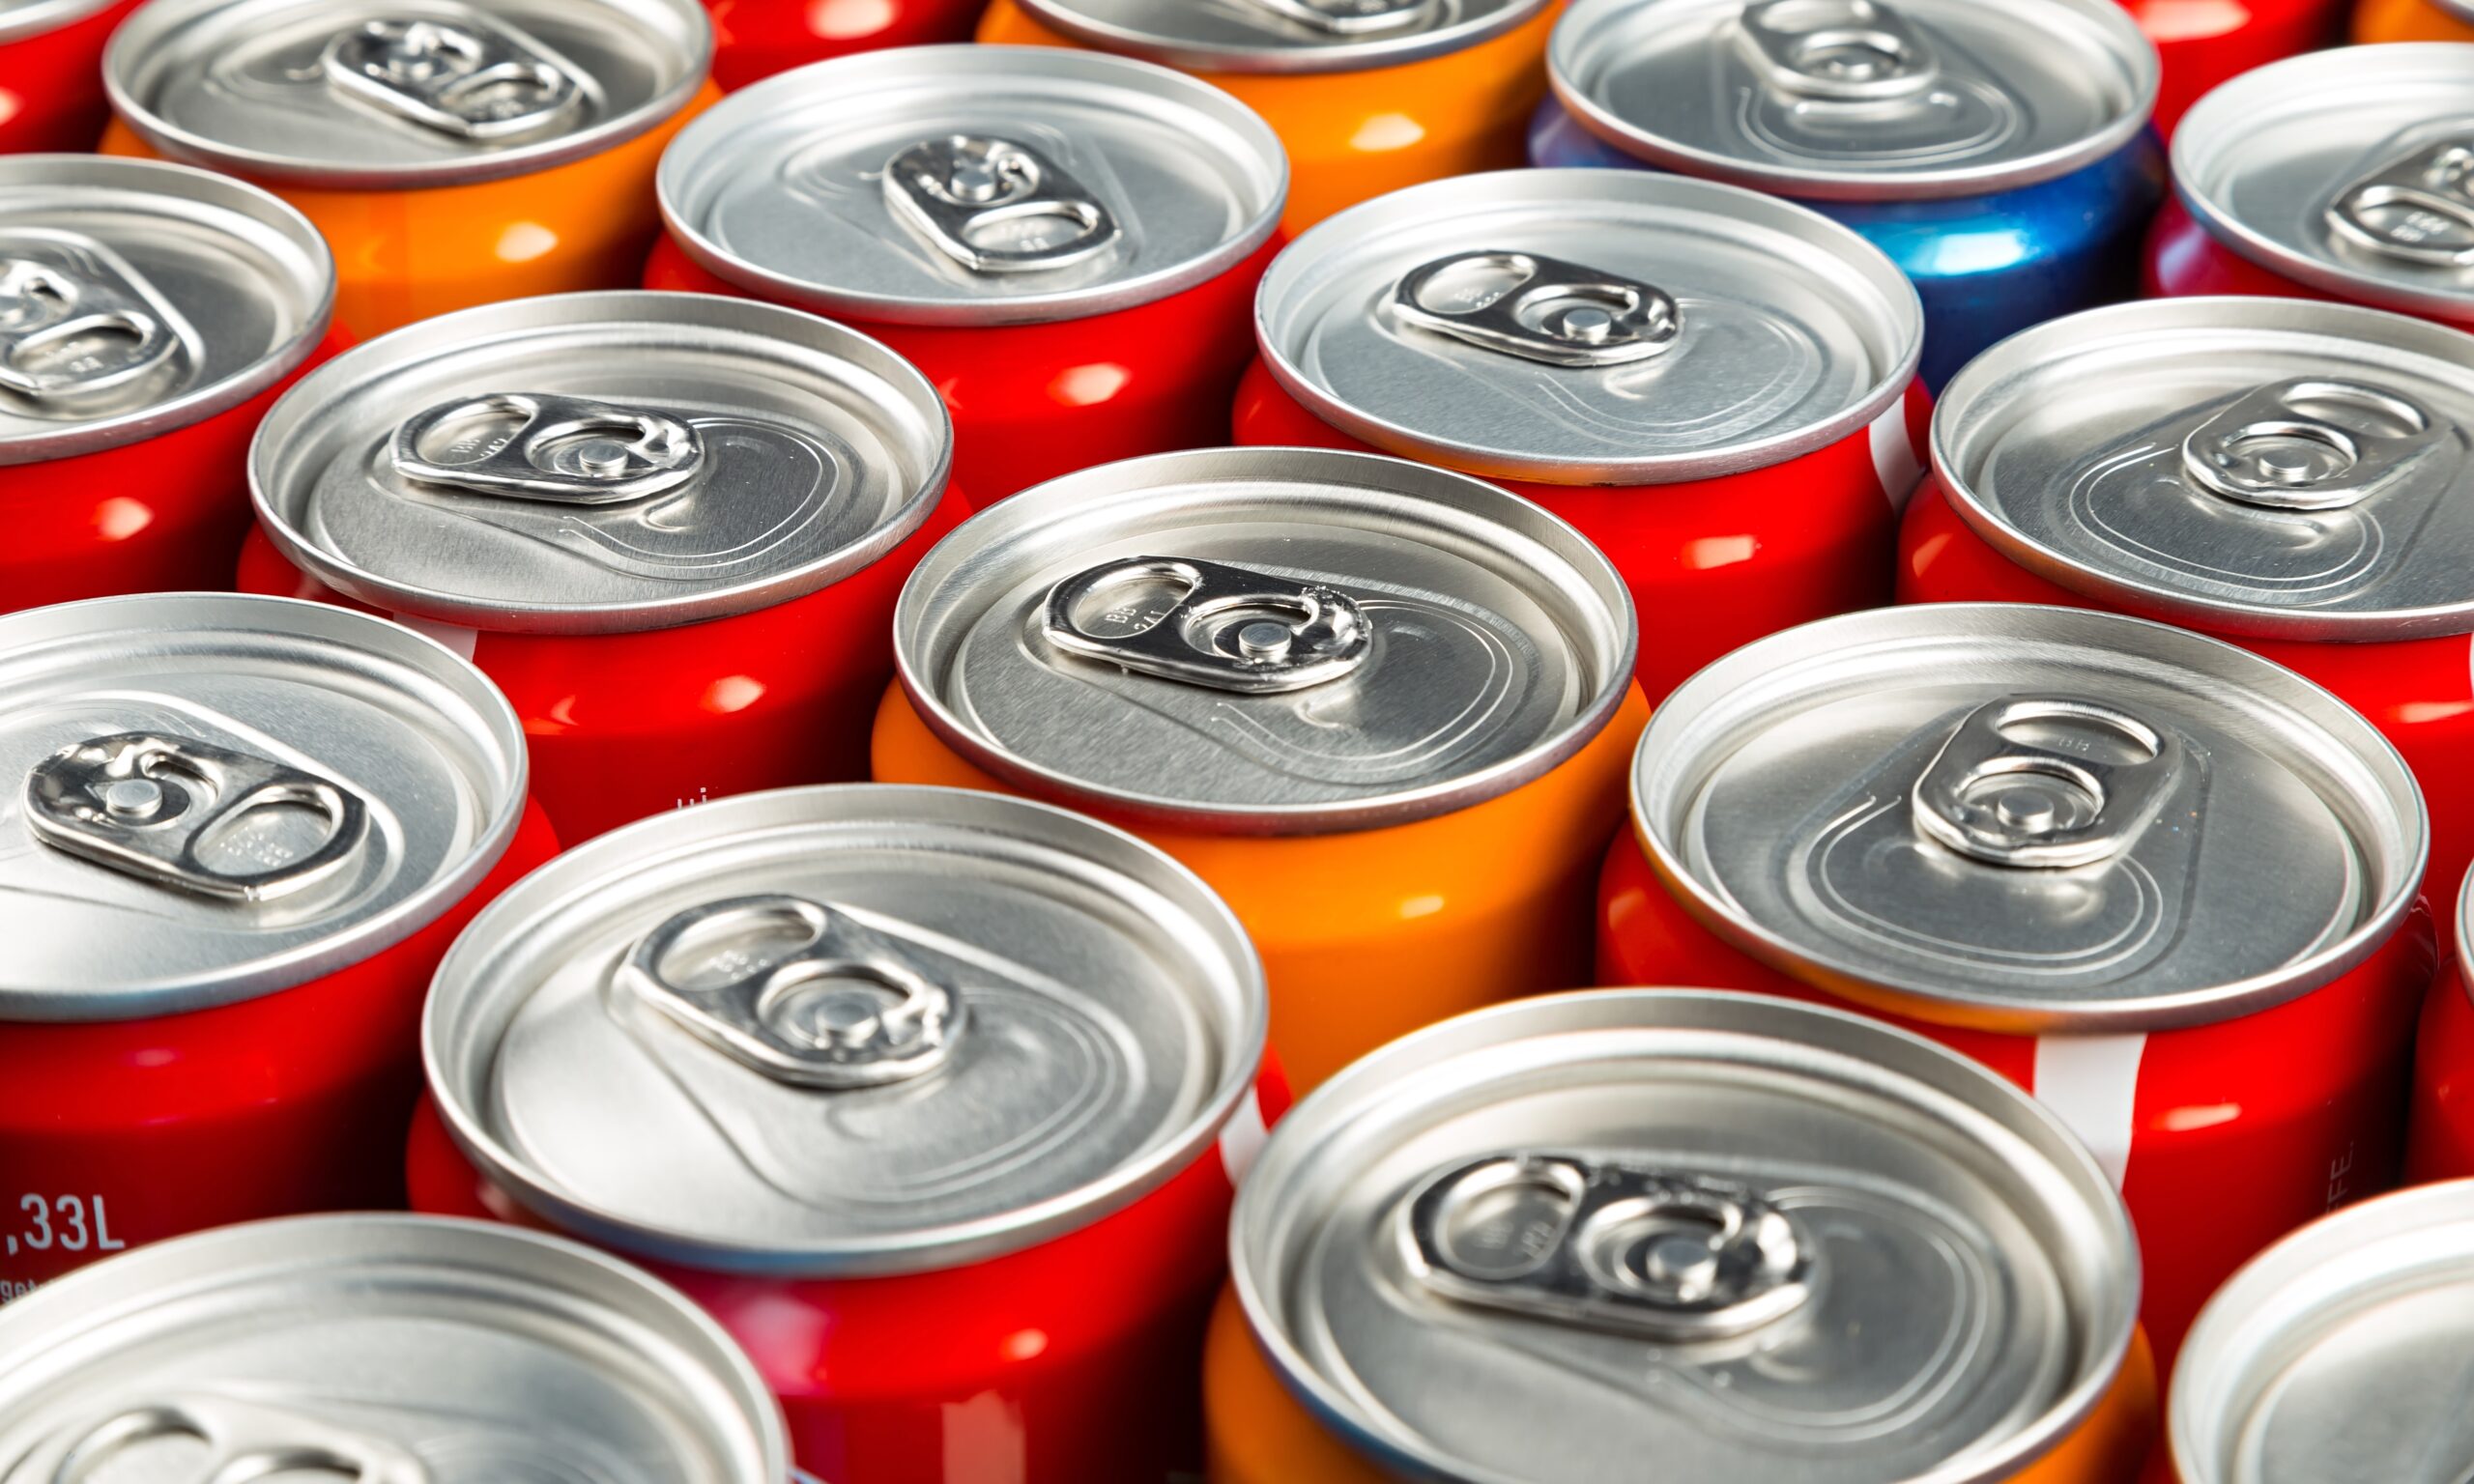 A close up photo of the tops of aluminum soda cans. The cans are orange, red and there is one that is blue.